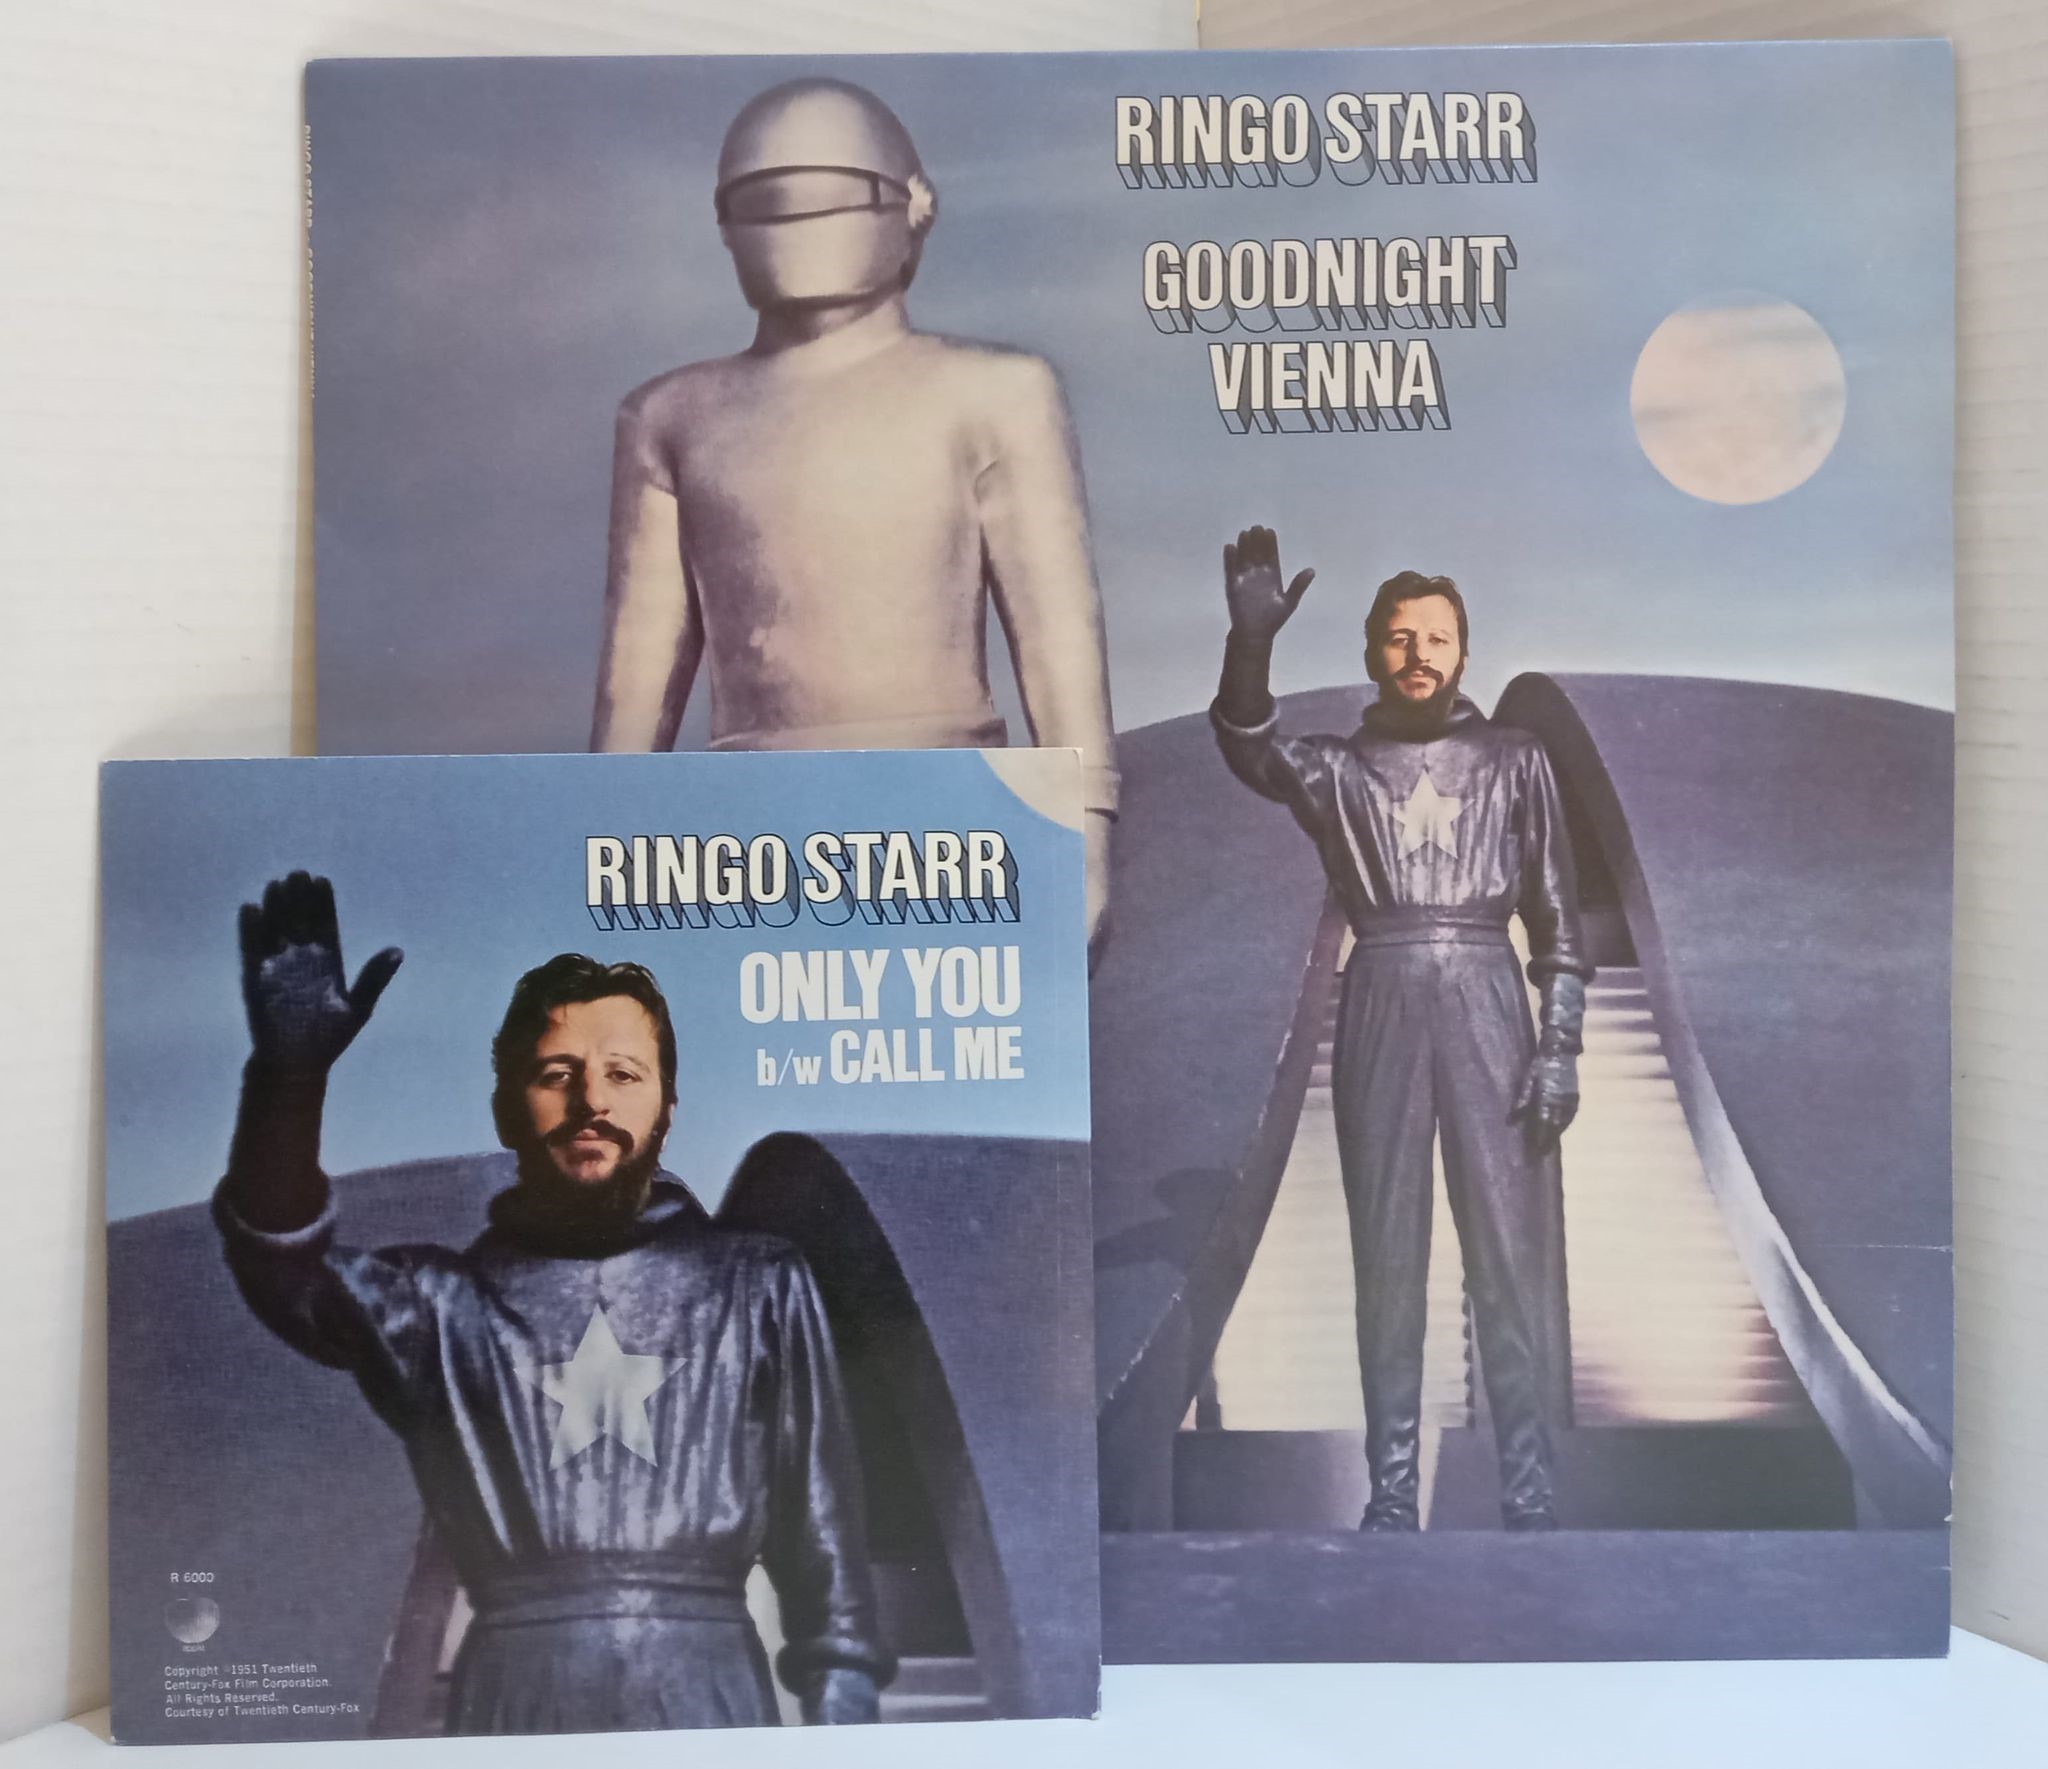 /Ringo Starr Goodnight Vienna Apple Records press kit including Fresh From Apple leaflet, Poster, - Image 6 of 6